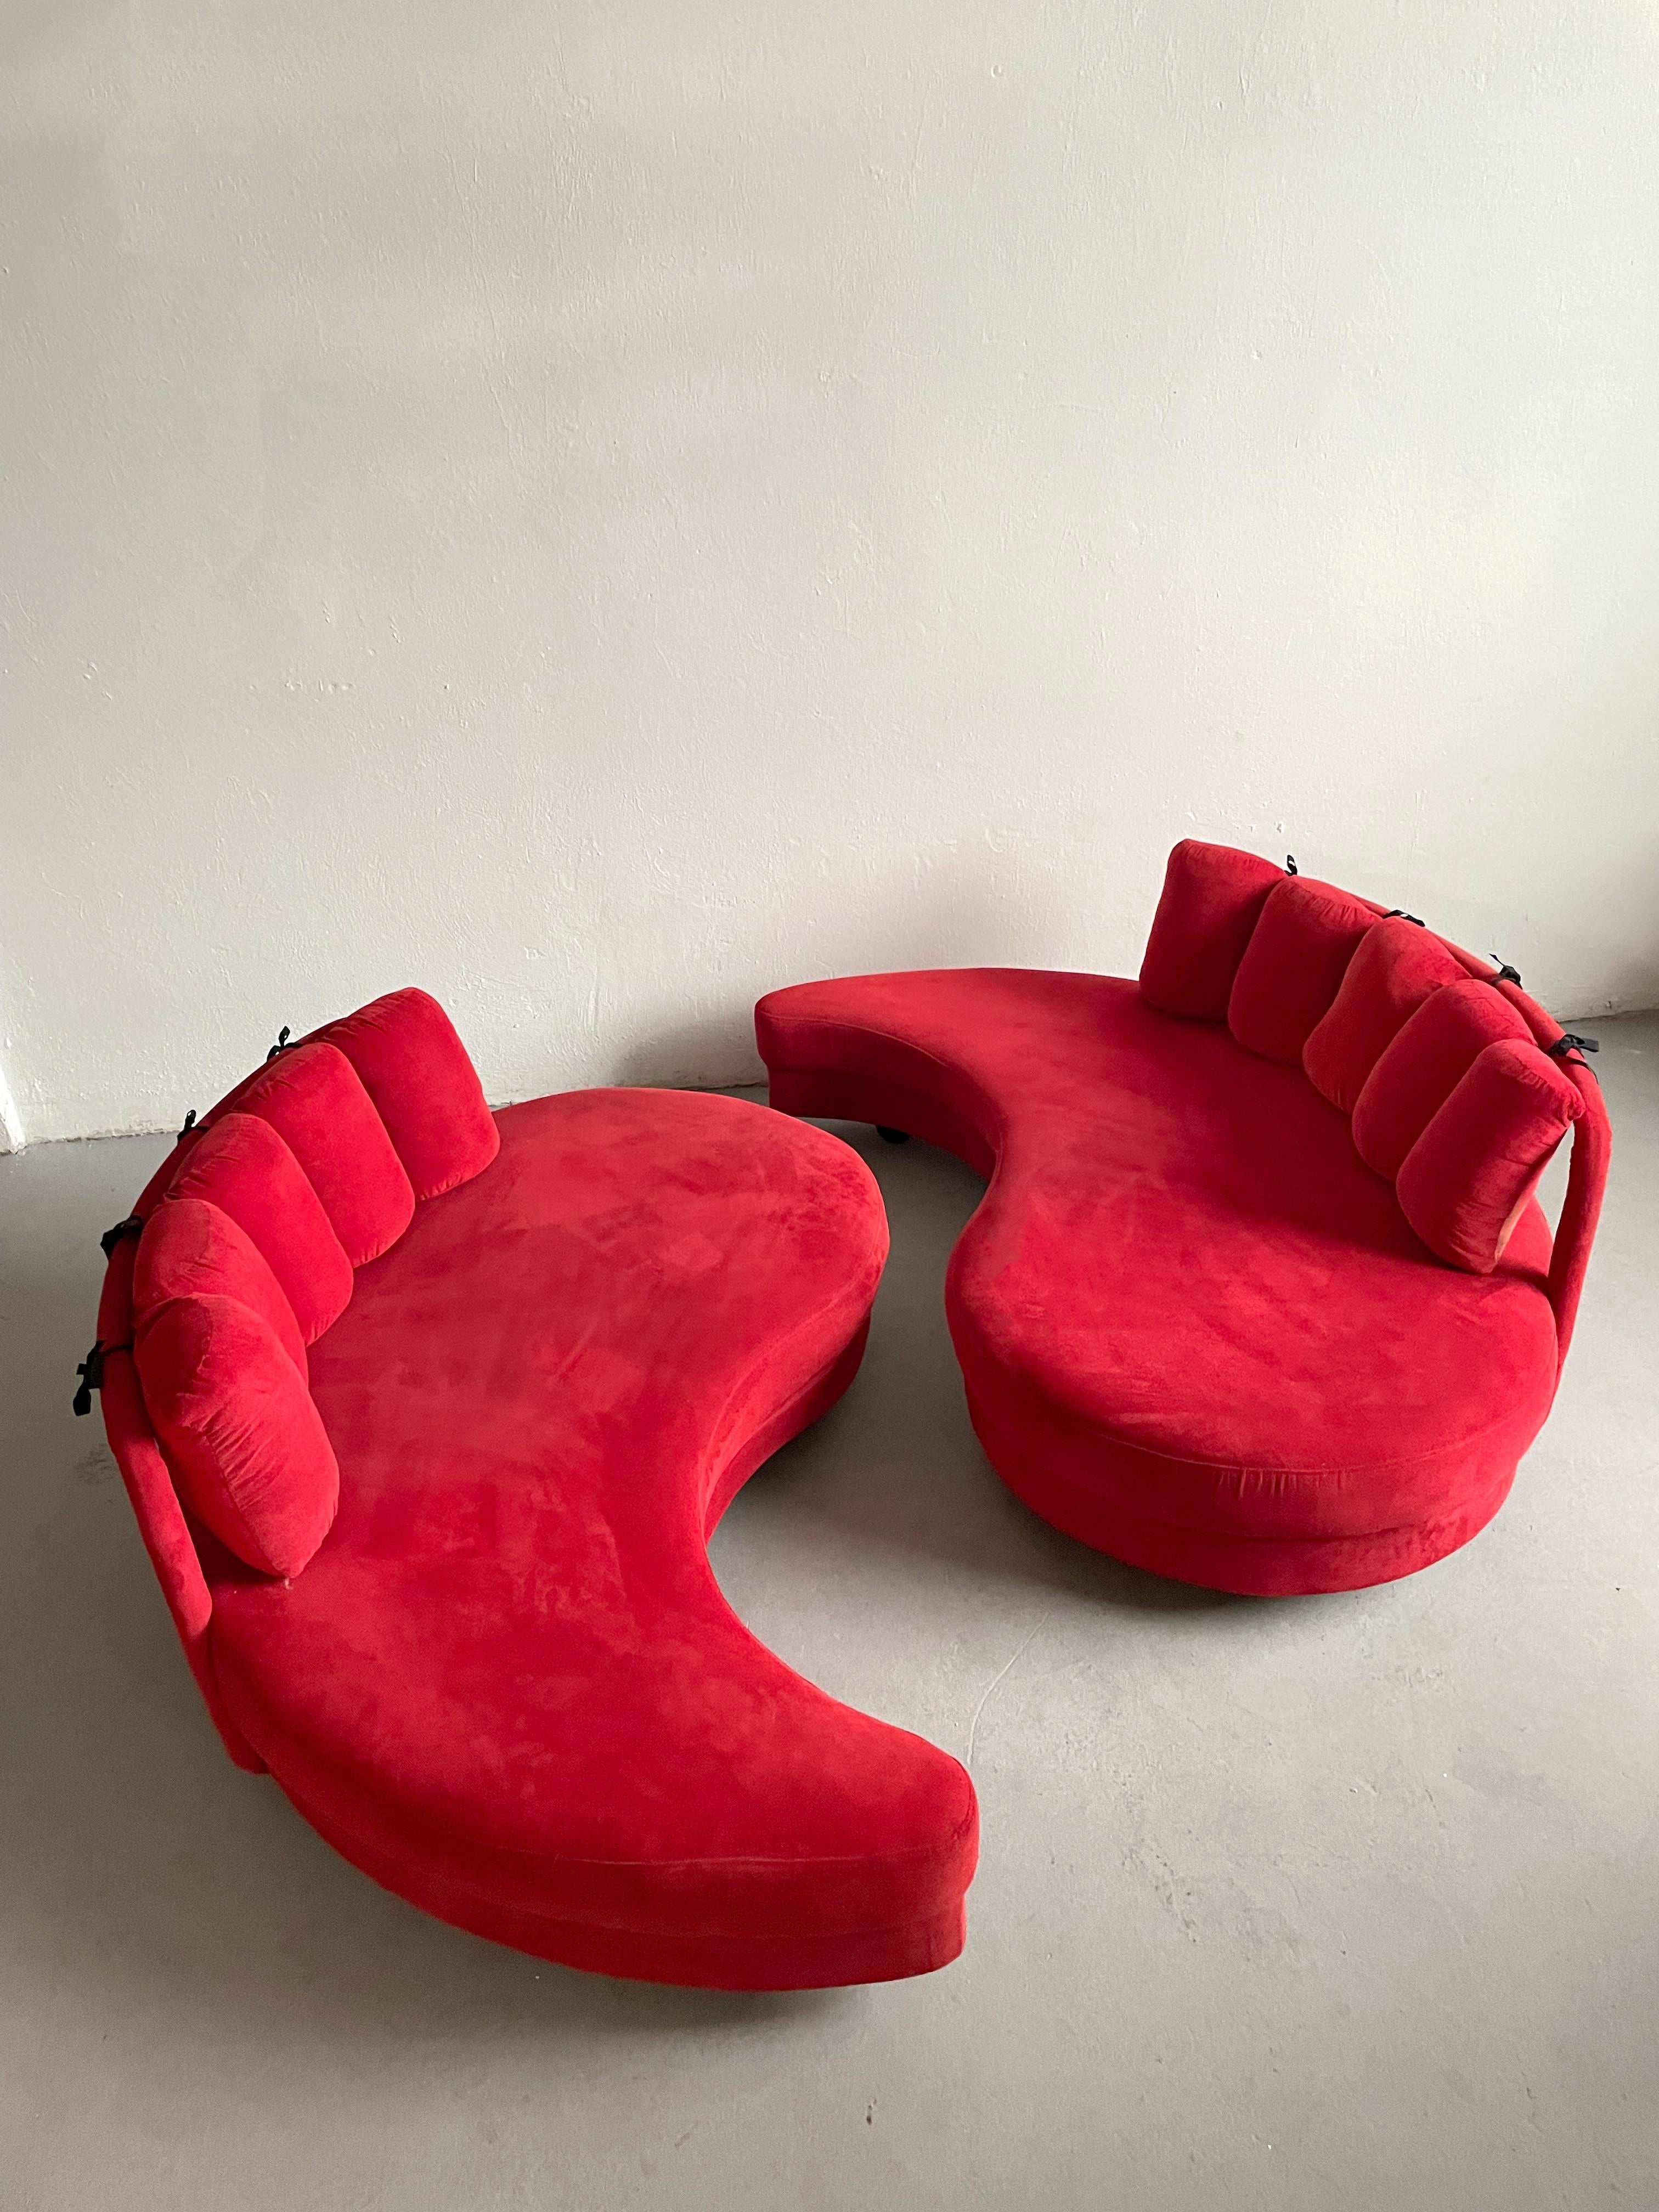  1980s curved sofa daybed 

Price is for the set of 2

Wooden frame upholstered in red fabric supported with five black painted globe-shaped wooden feet 

Unknown manufacturer

Both sofas are in good vintage condition showing some small traces of